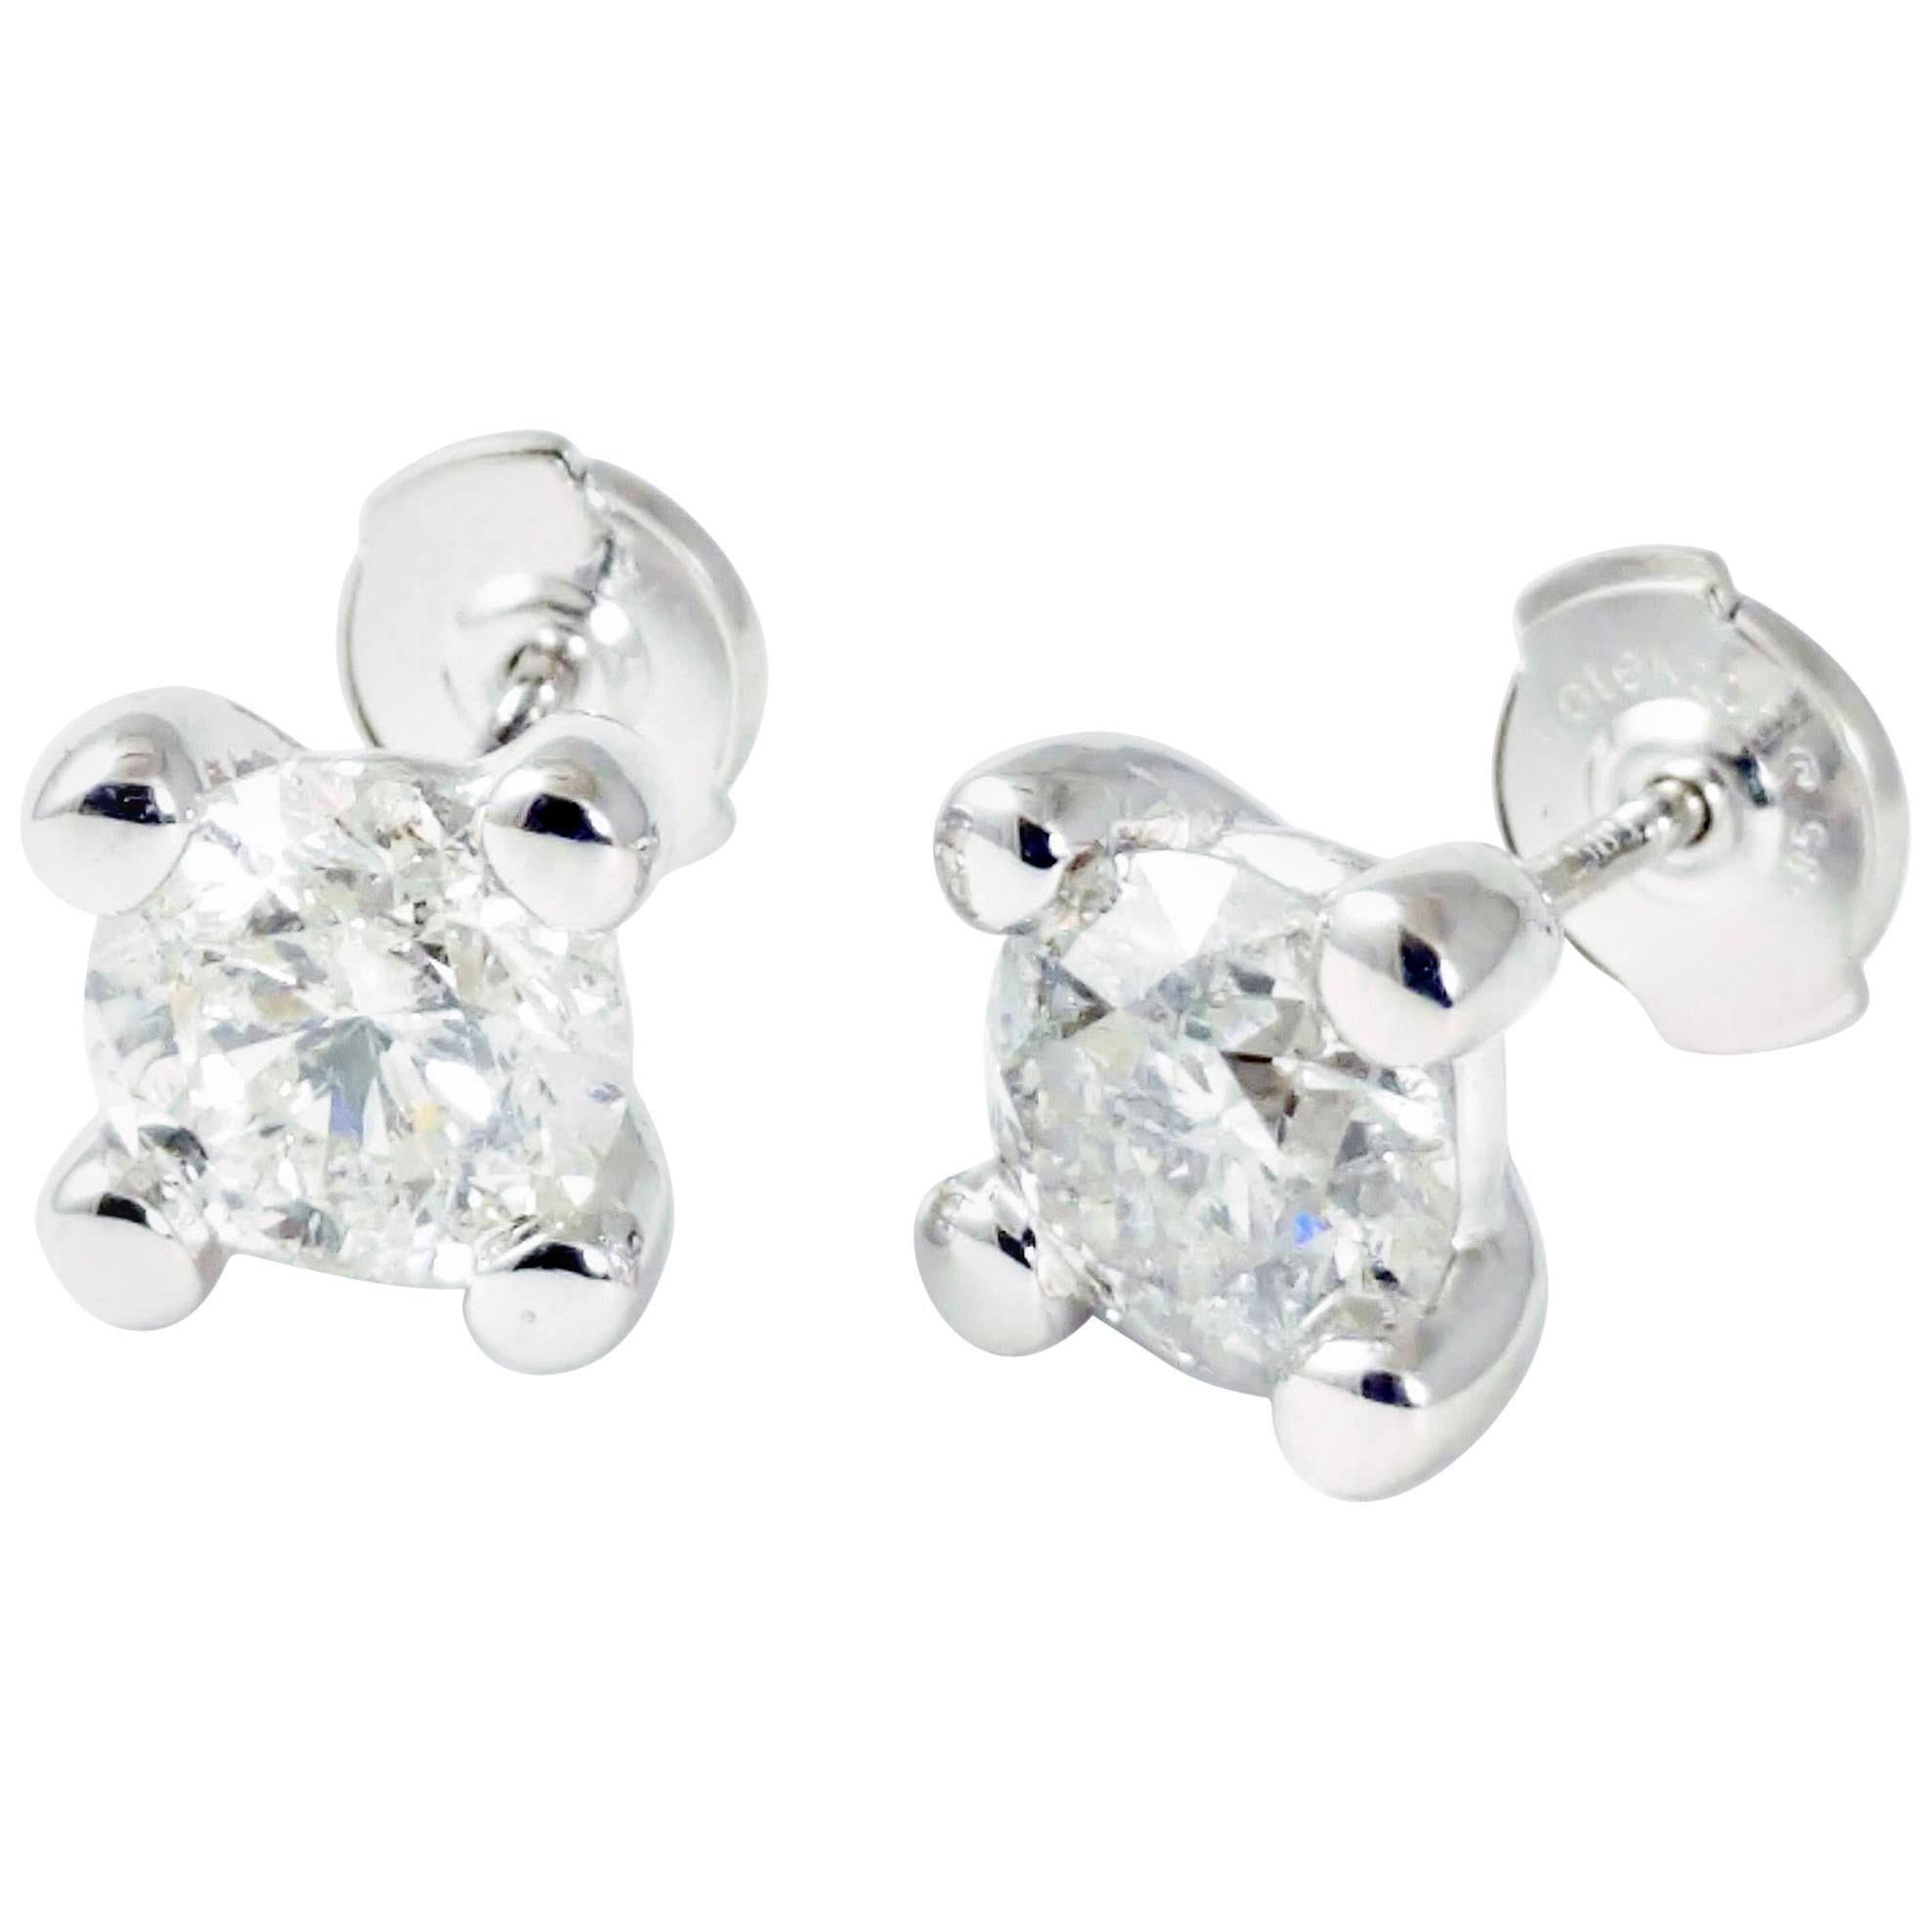 2.61 Carat Round Brilliant Diamond Stud Earrings Gold Contemporary Four-Prong For Sale